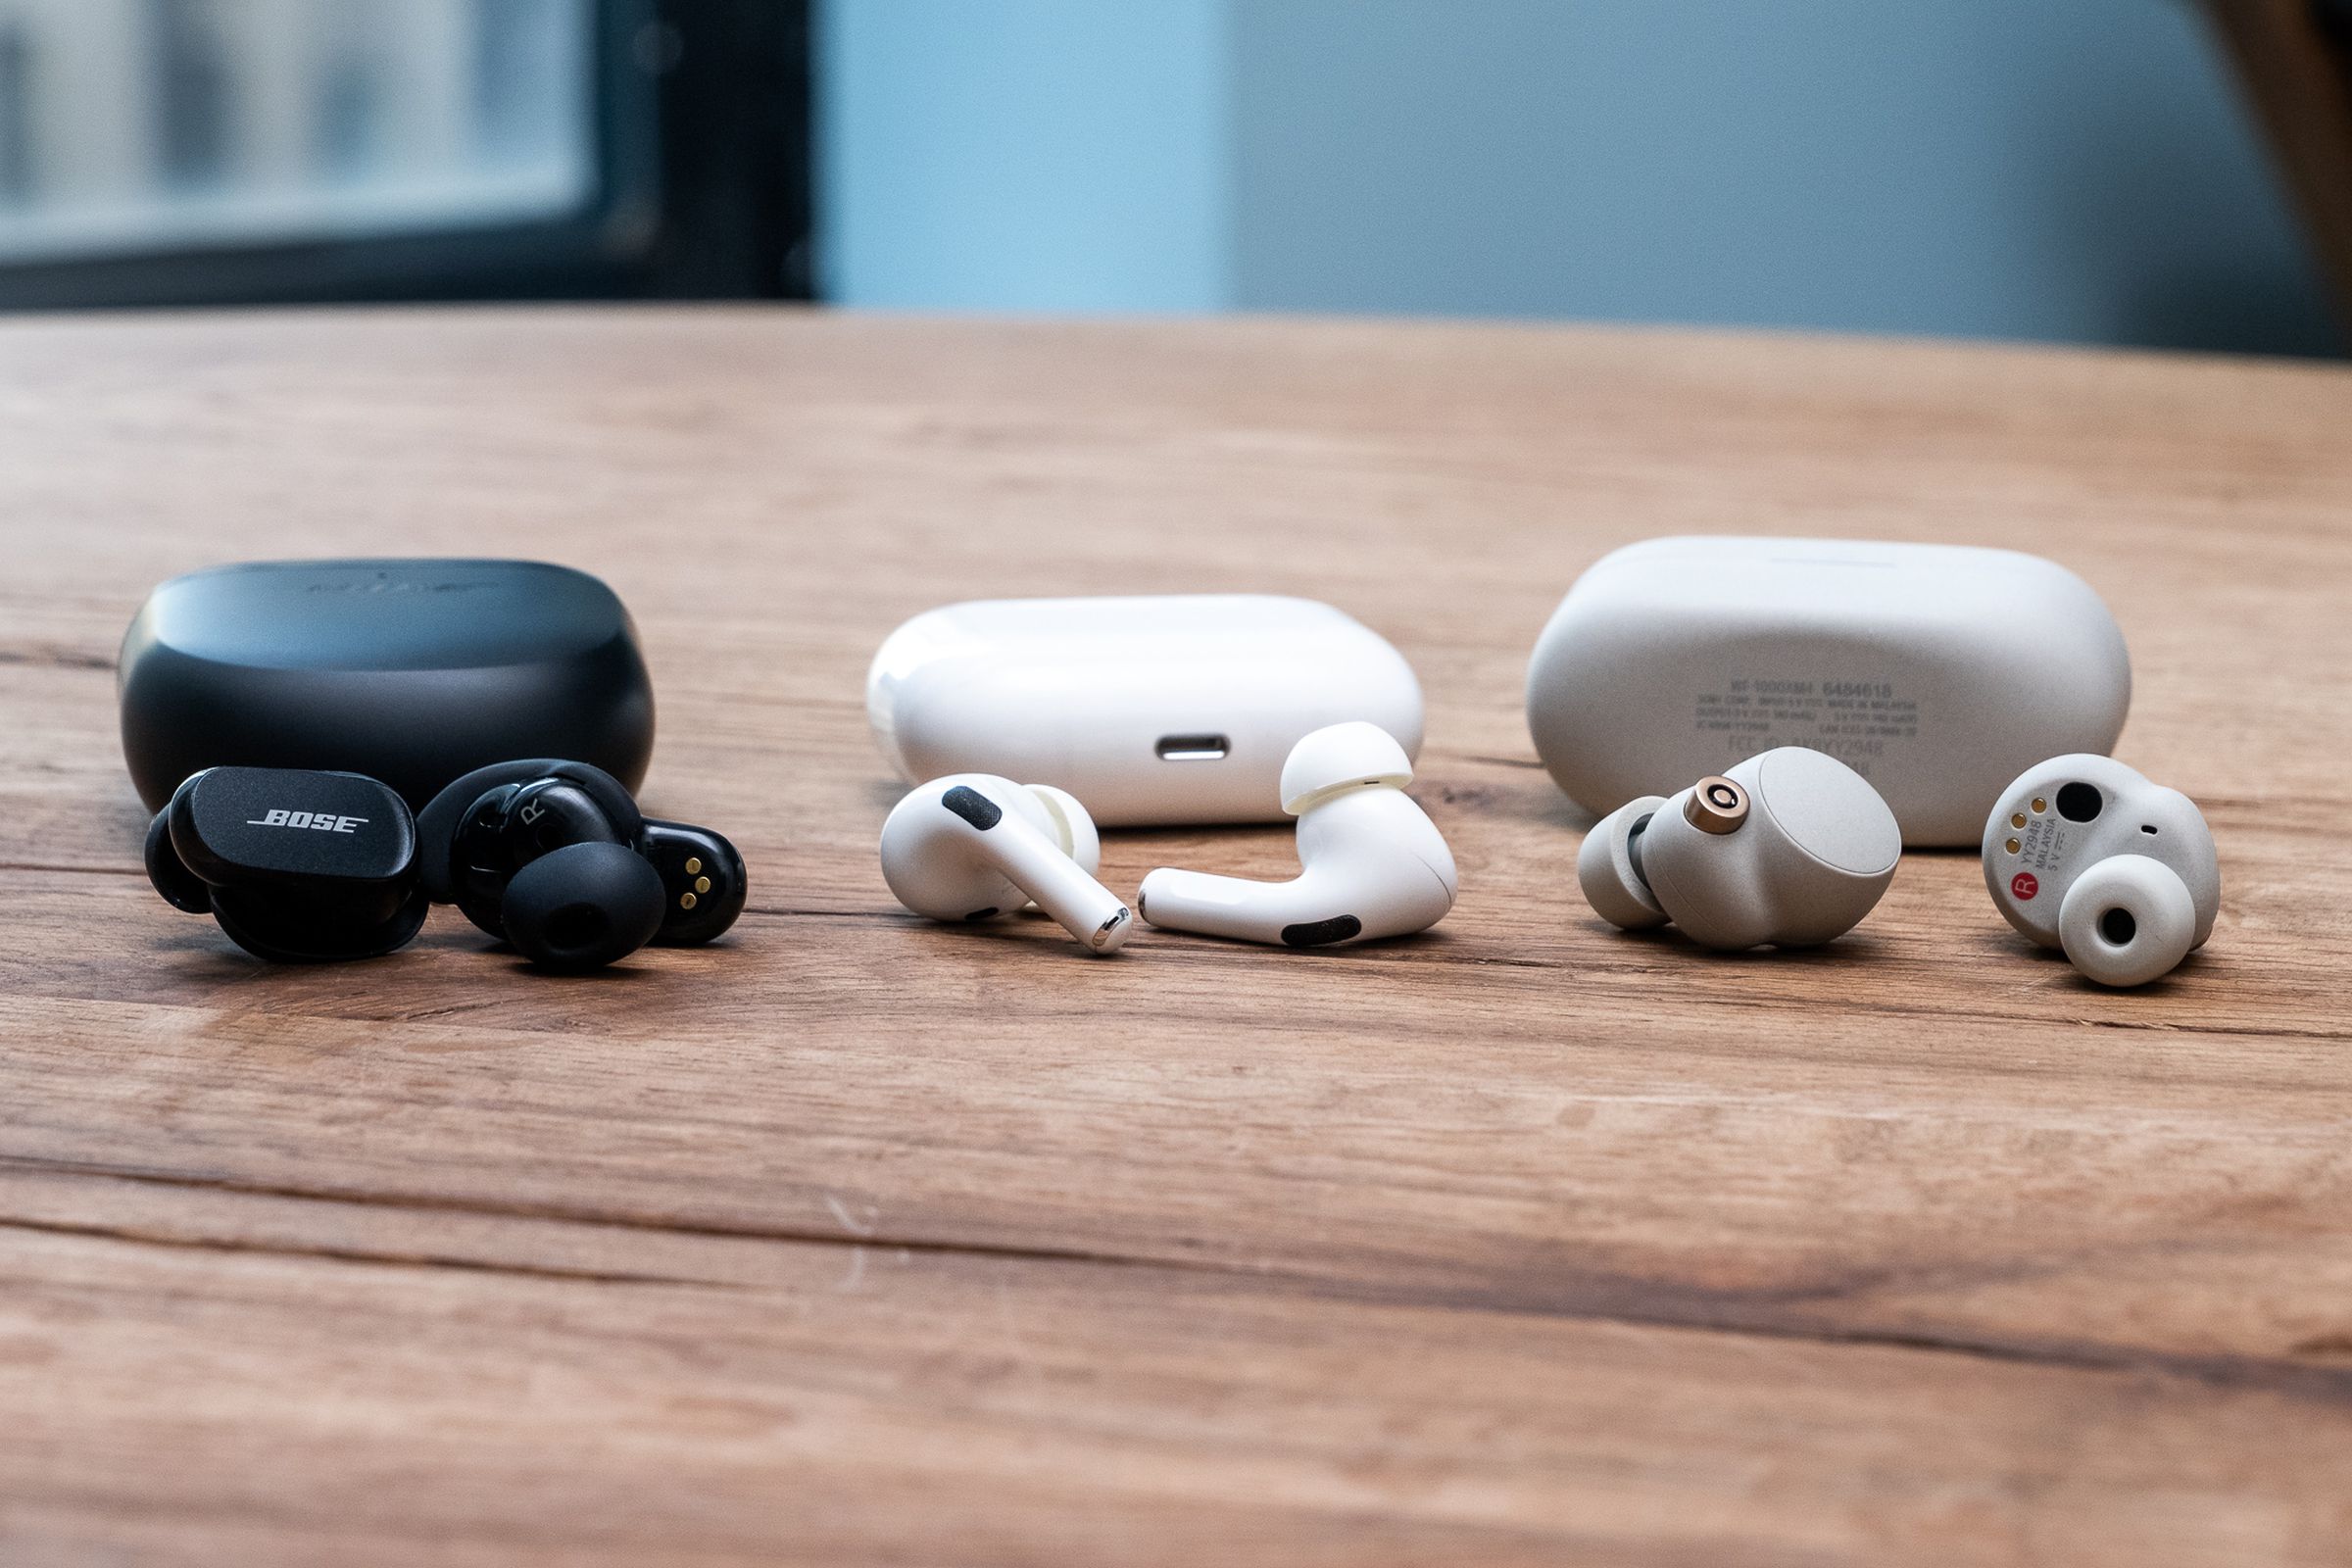 A side-by-side comparison photo of Bose’s QuietComfort Earbuds II, Apple’s AirPods Pro, and Sony’s WF-1000XM4.